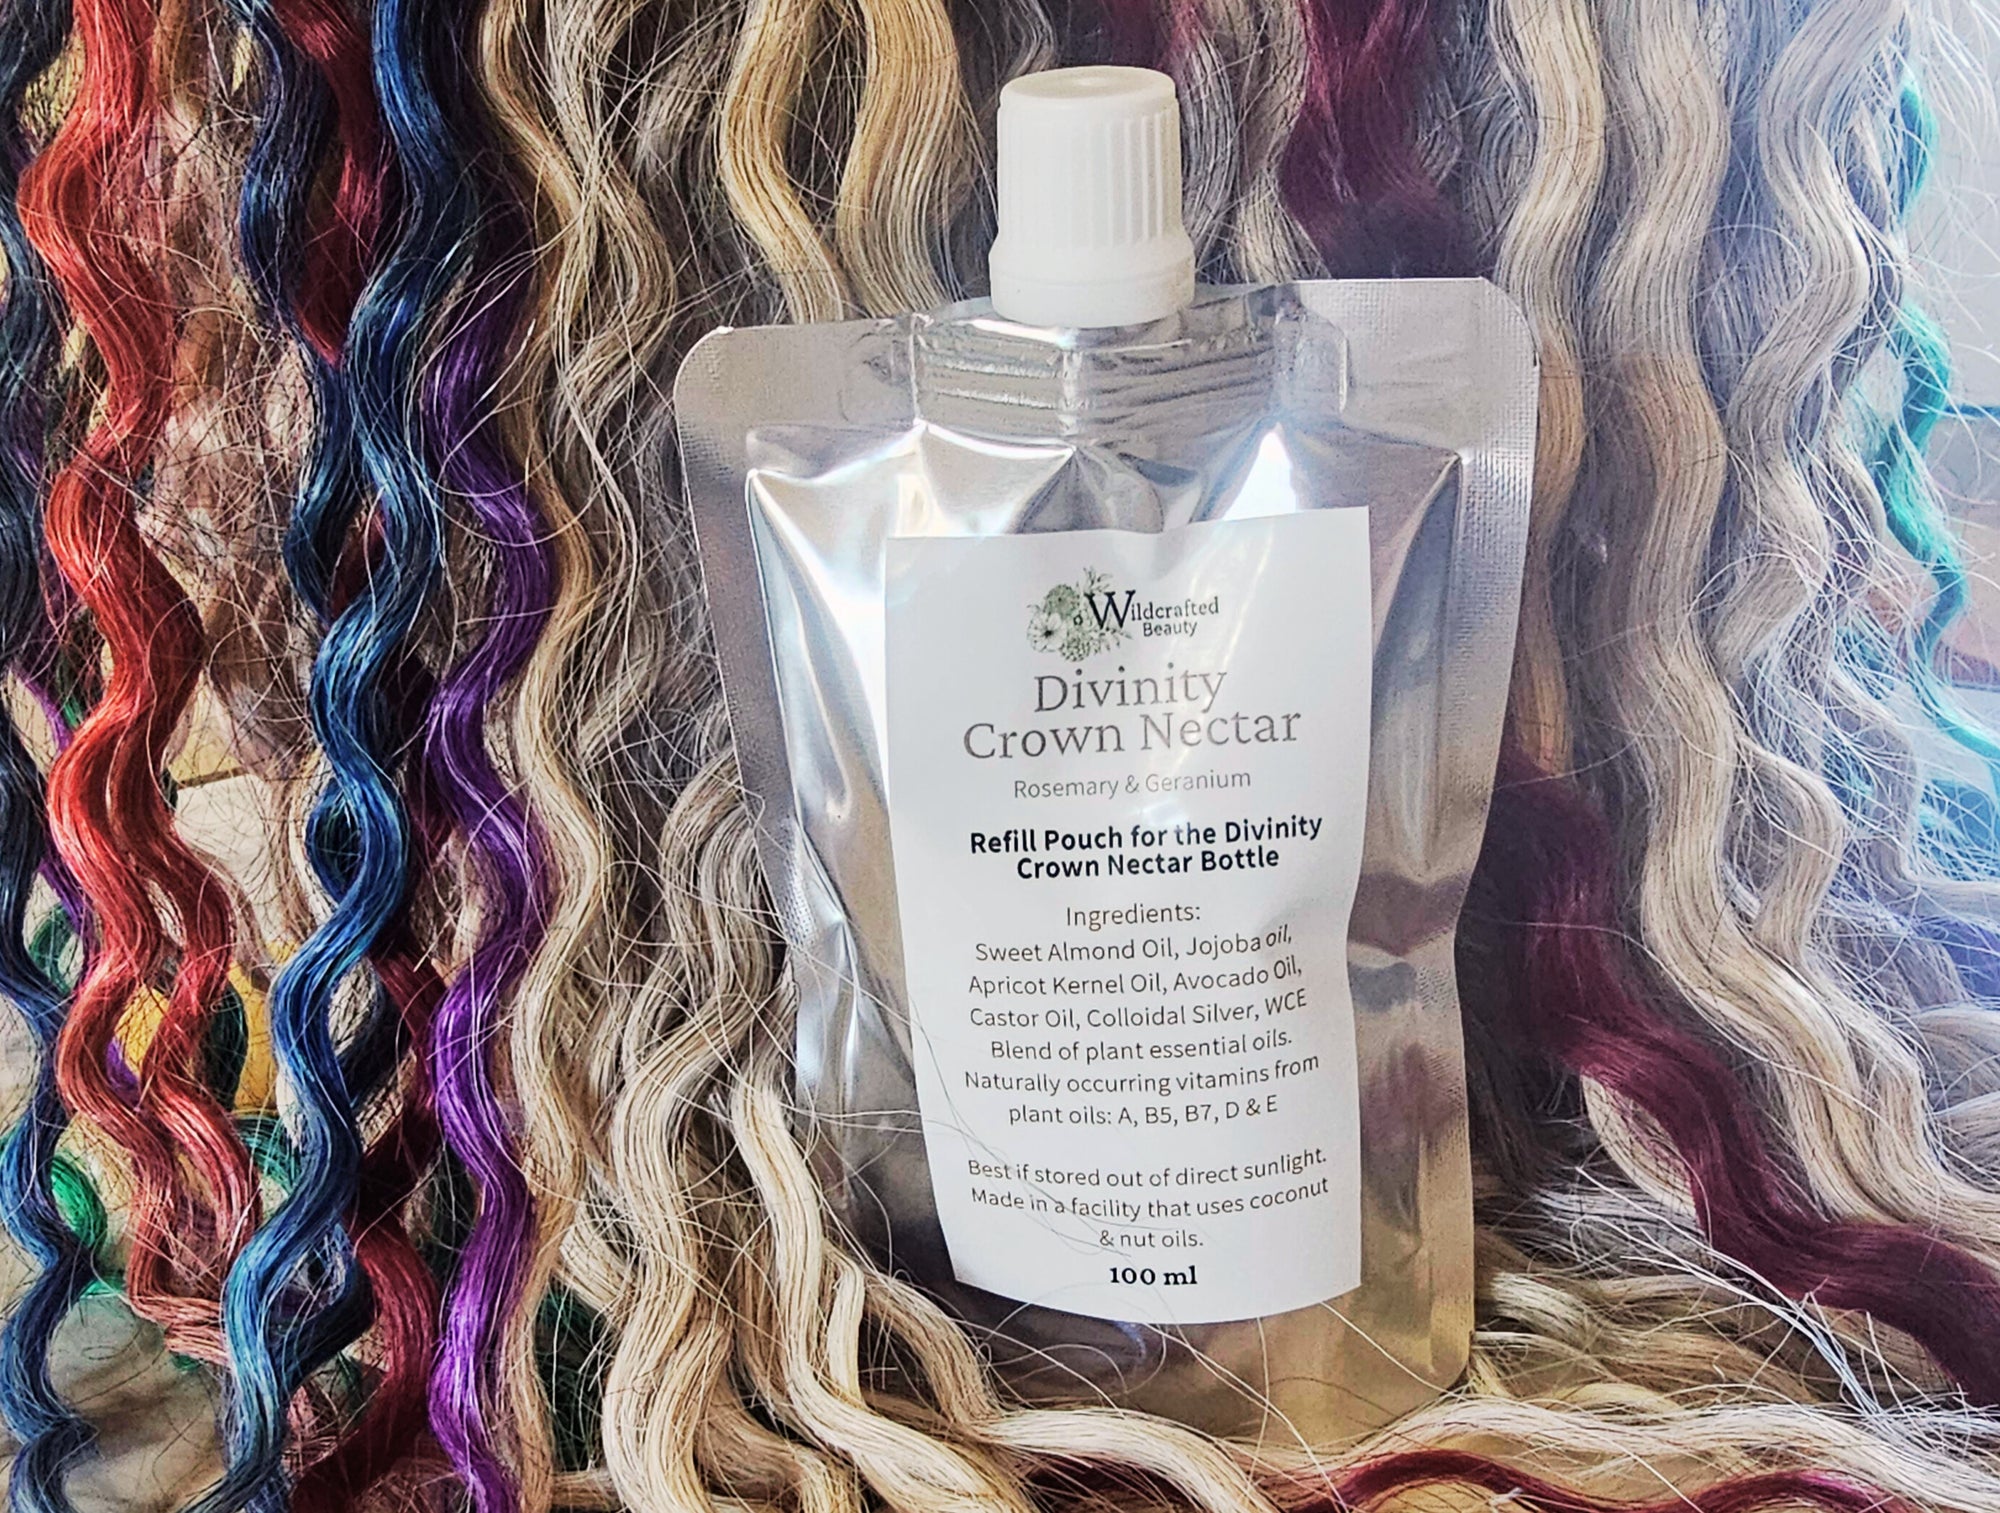 Refill Pouch Divinity Crown Nectar - Moisturize, Tame Frizz, Strengthen